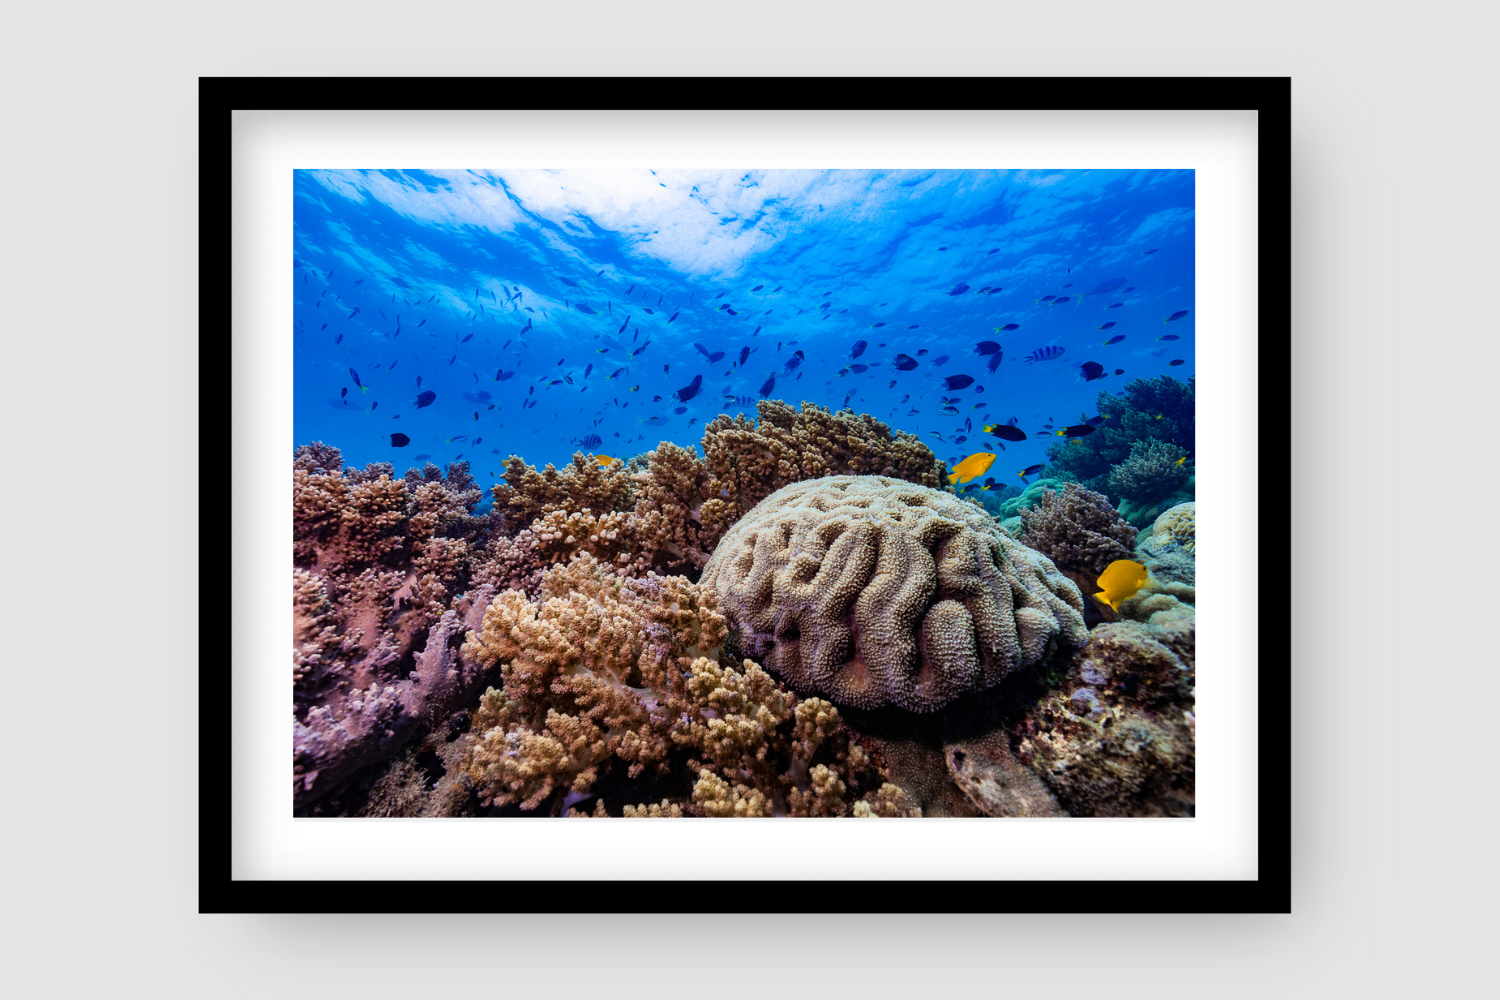 blue ocean with small fish above 2 yellow fish swimming around a sponge of coral